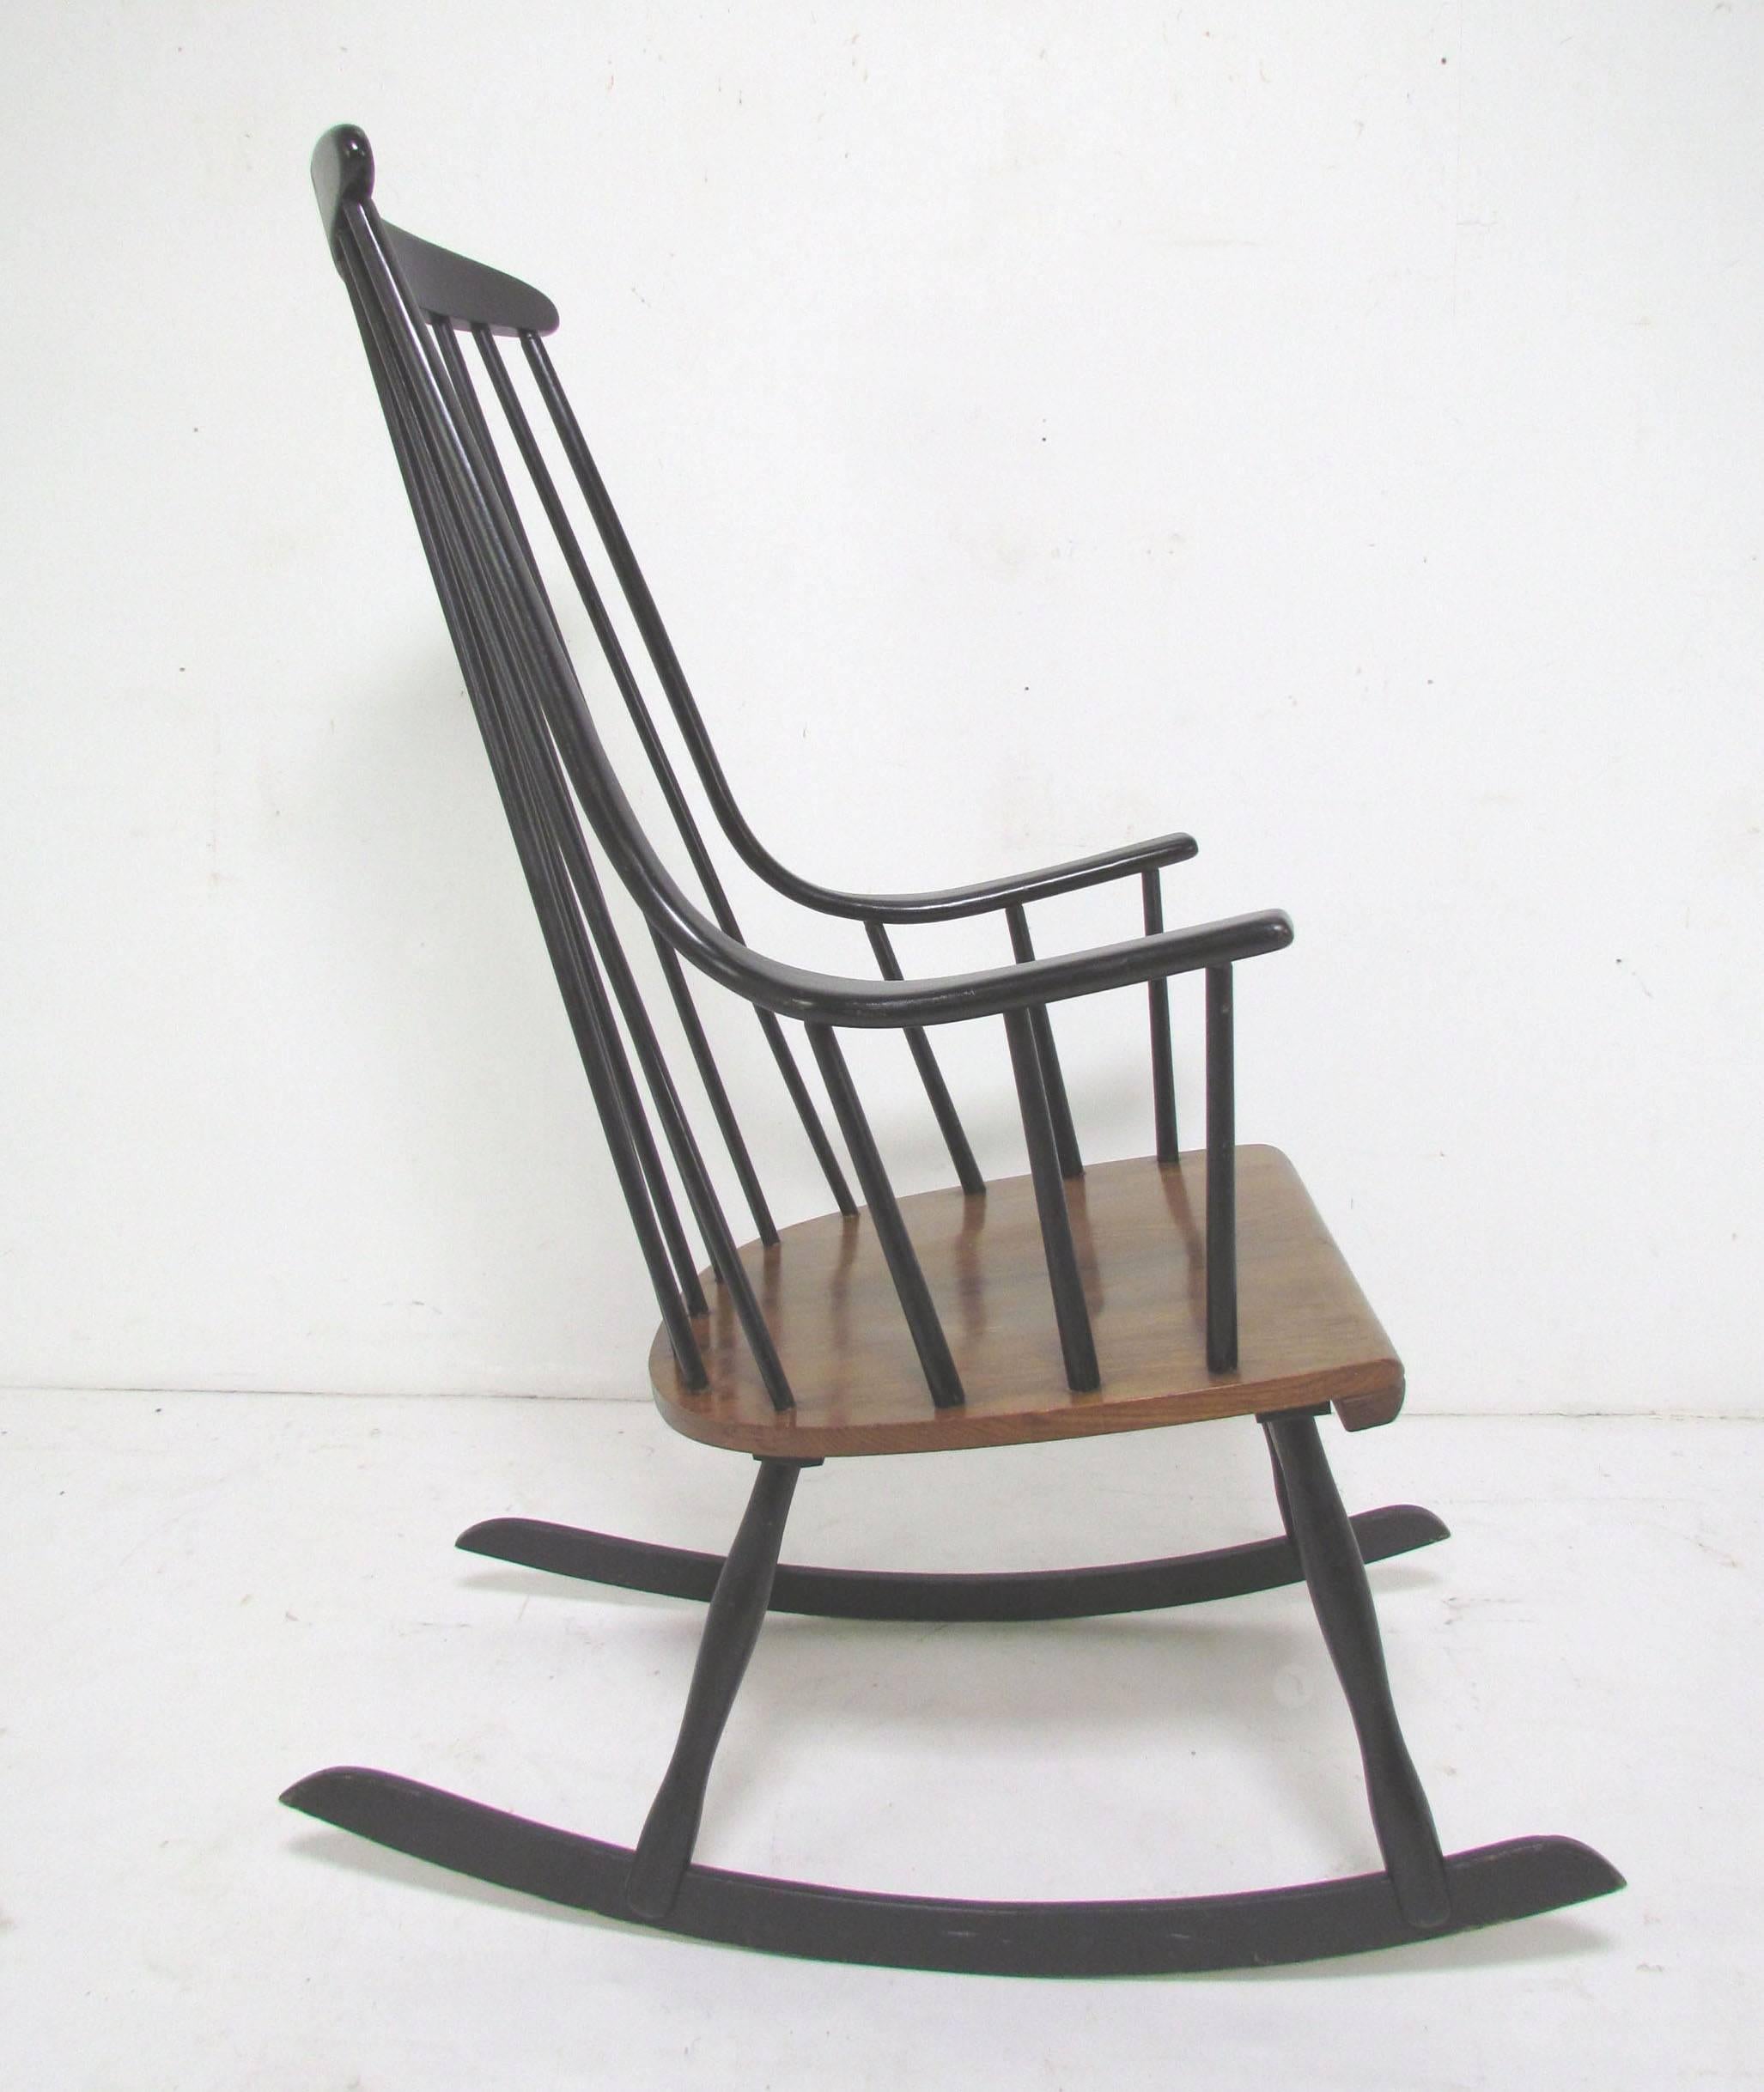 Danish Modern rocking chair designed by Lena Larsson, Sweden, circa late 1950s-early 1960s. Original black lacquer finish with contrasting ash seat. This design is often mistakenly attributed to Ilmari Tapiovaara. Very faint maker's mark on